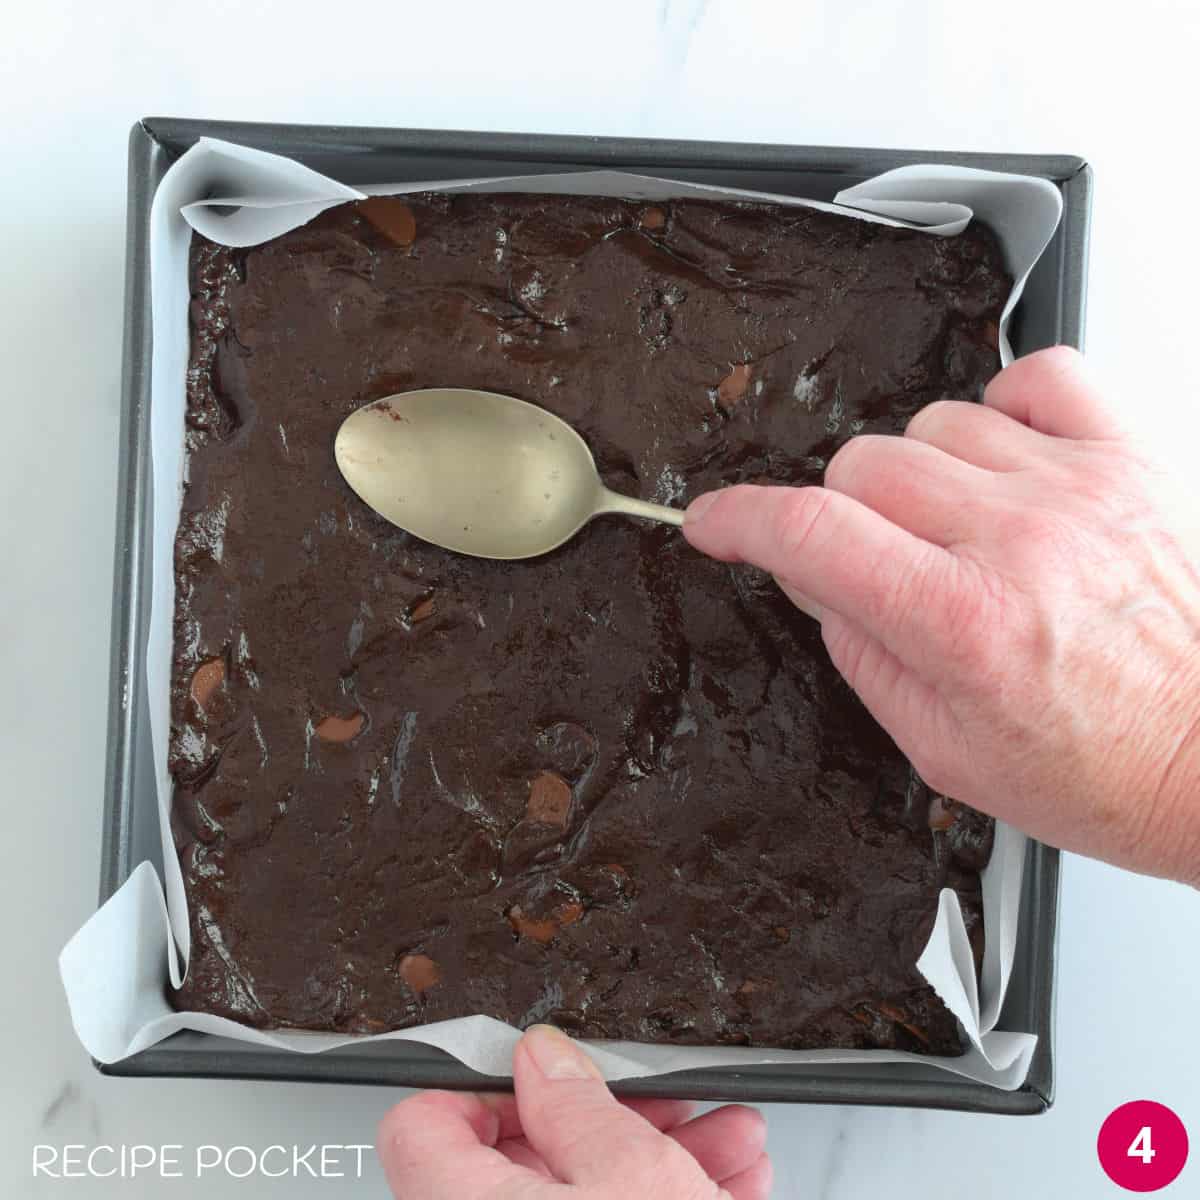 Brownie batter being smoothed evenly in a cake tin with the back of a spoon.